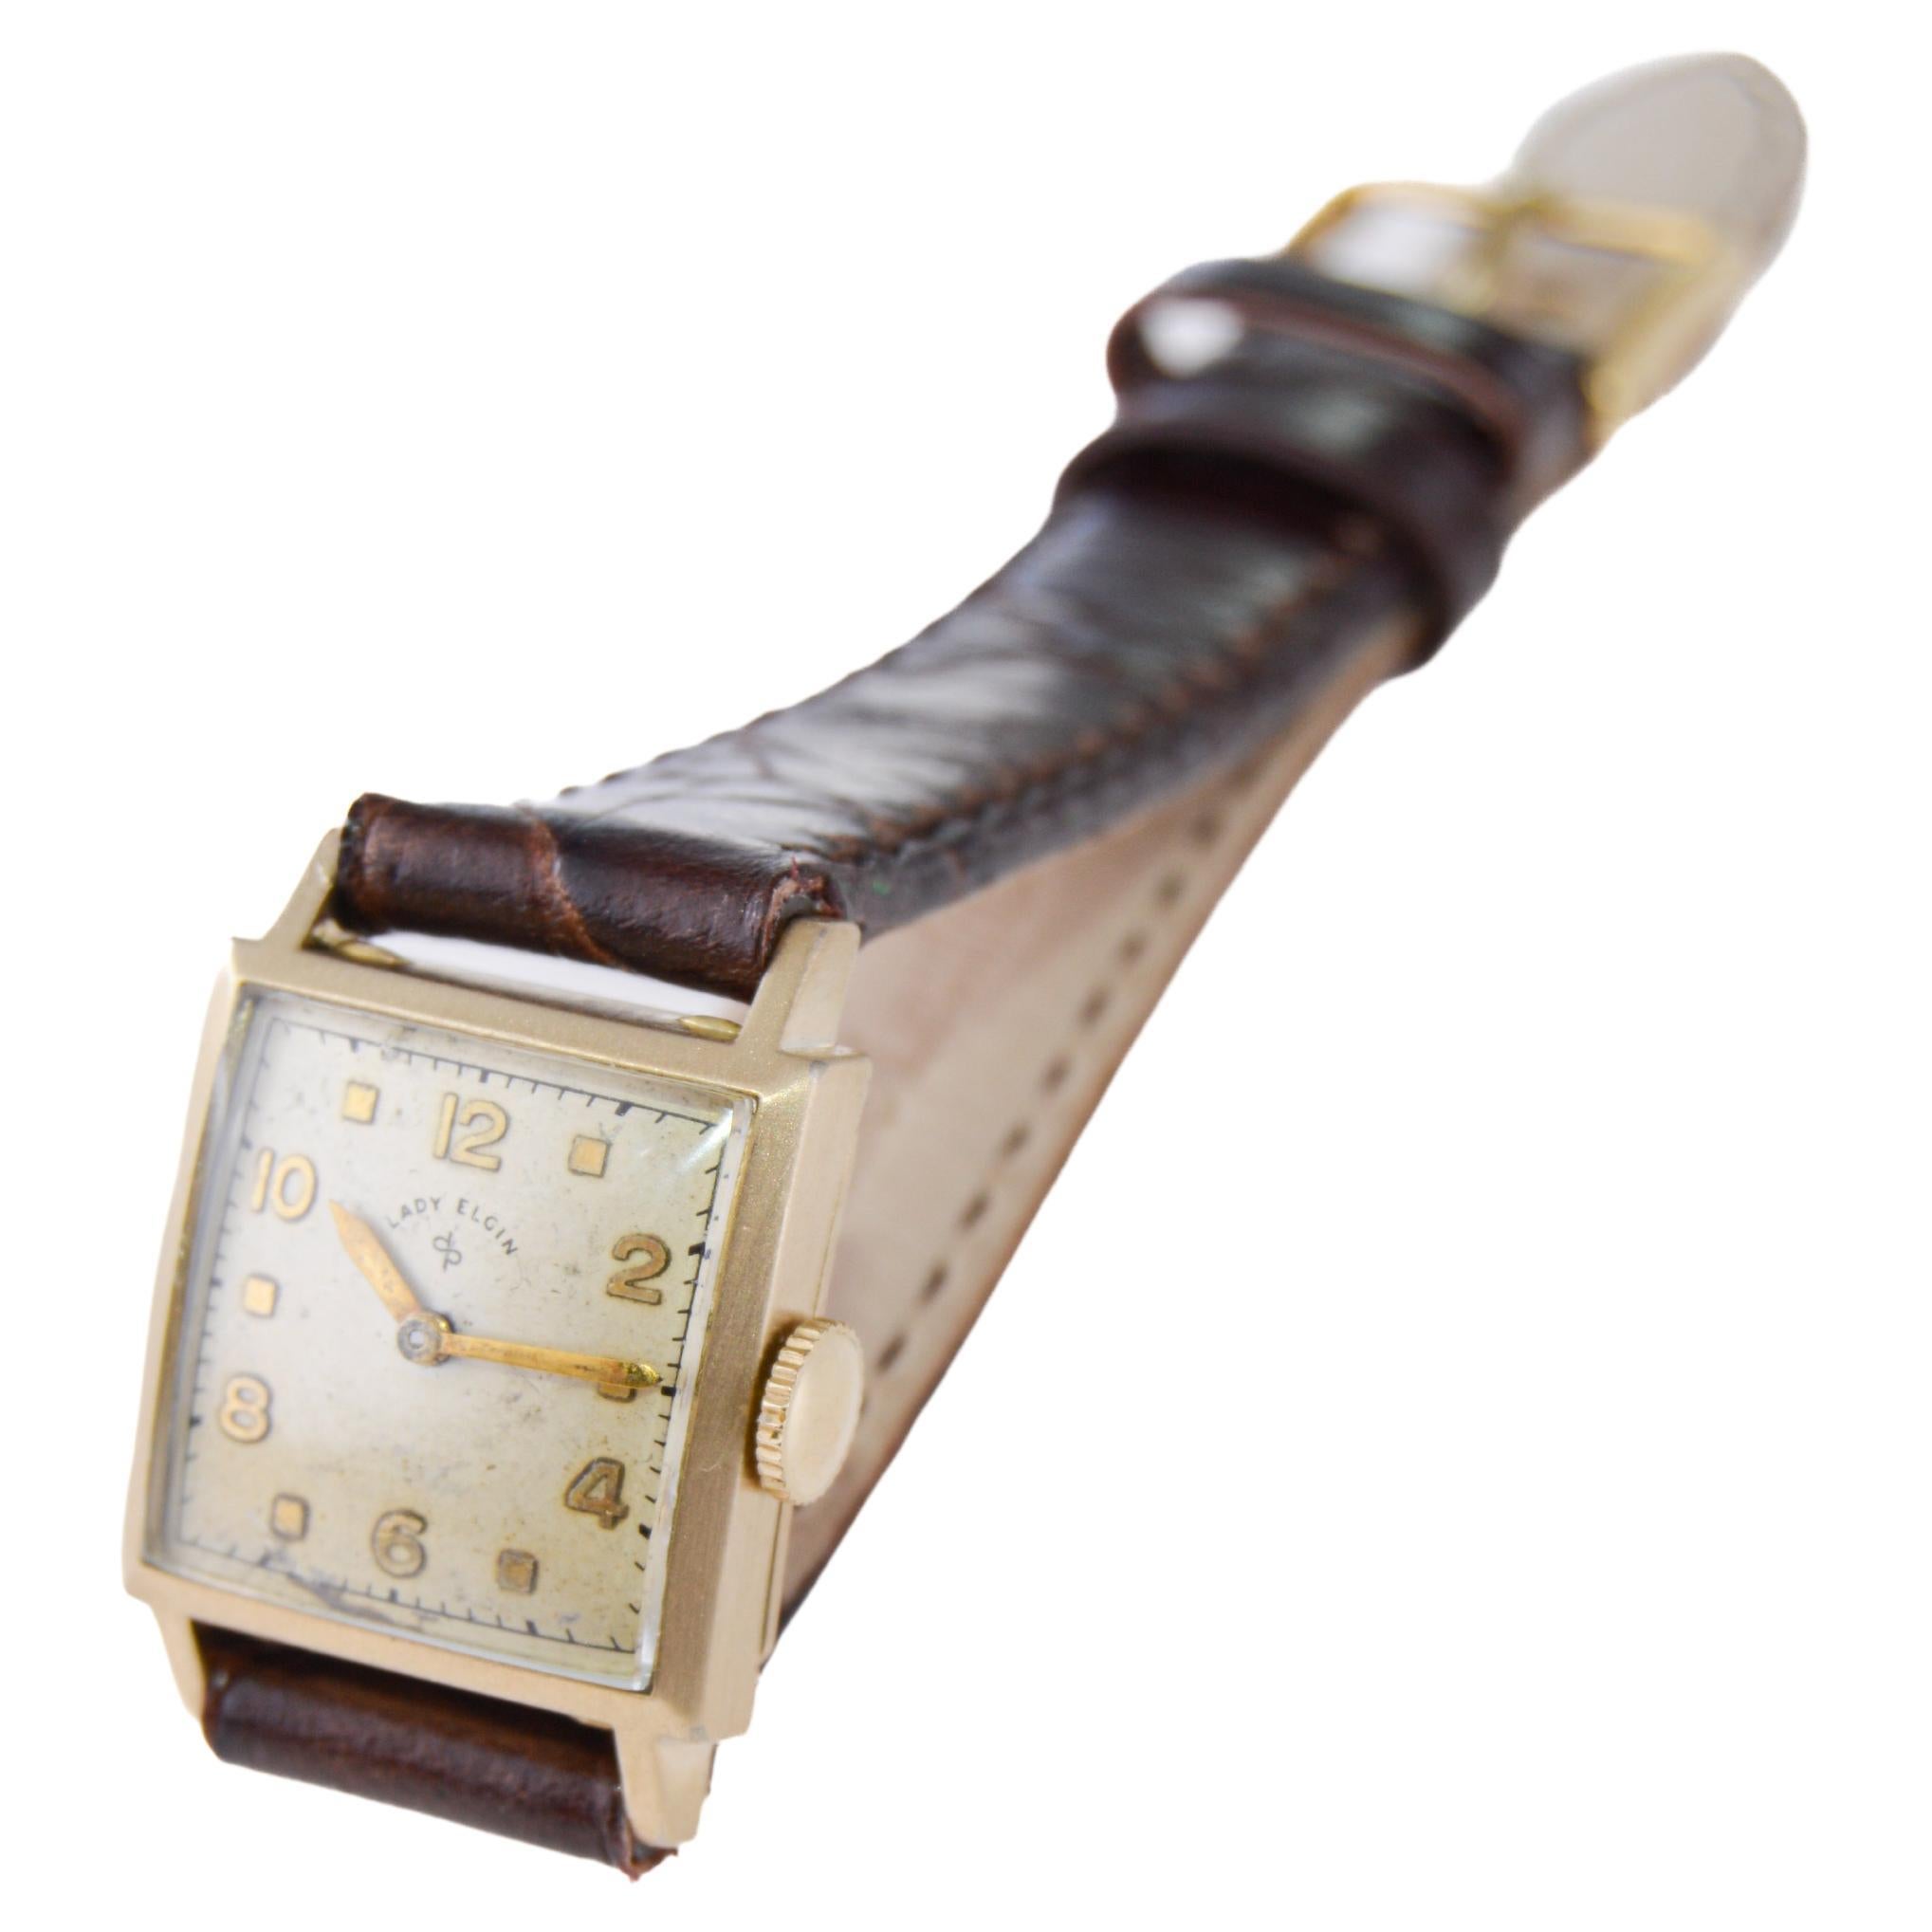 Lady Elgin Gold-Filled Art Deco Tank Watch with Original Dial from 1940's In Excellent Condition For Sale In Long Beach, CA